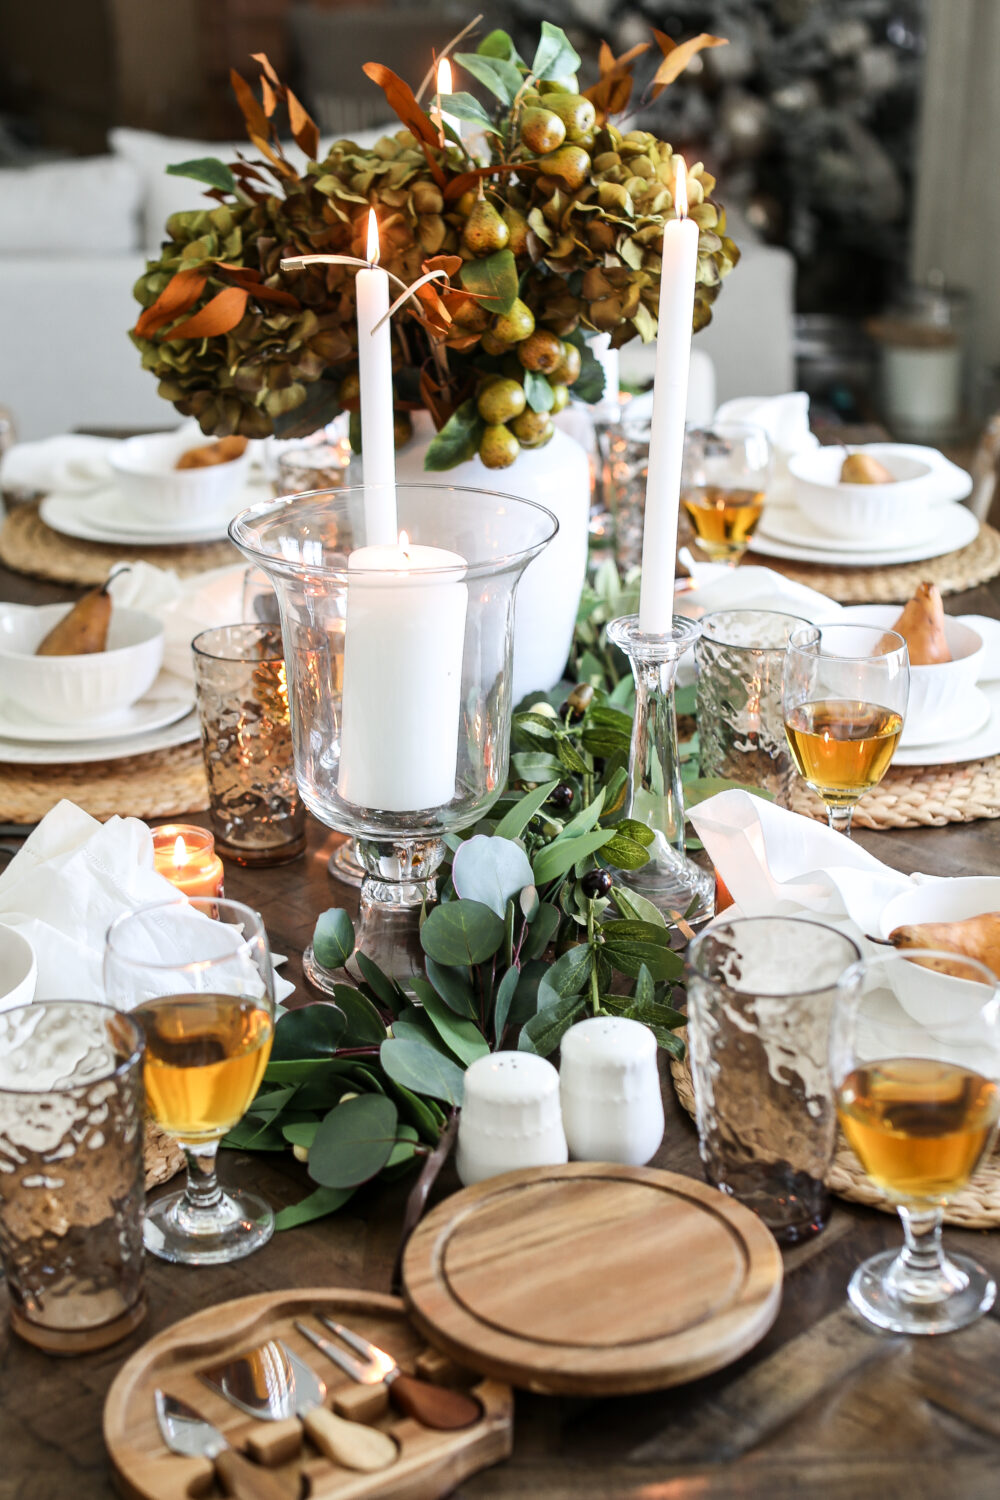 Setting an Elegant Thanksgiving Table with Natural Elements